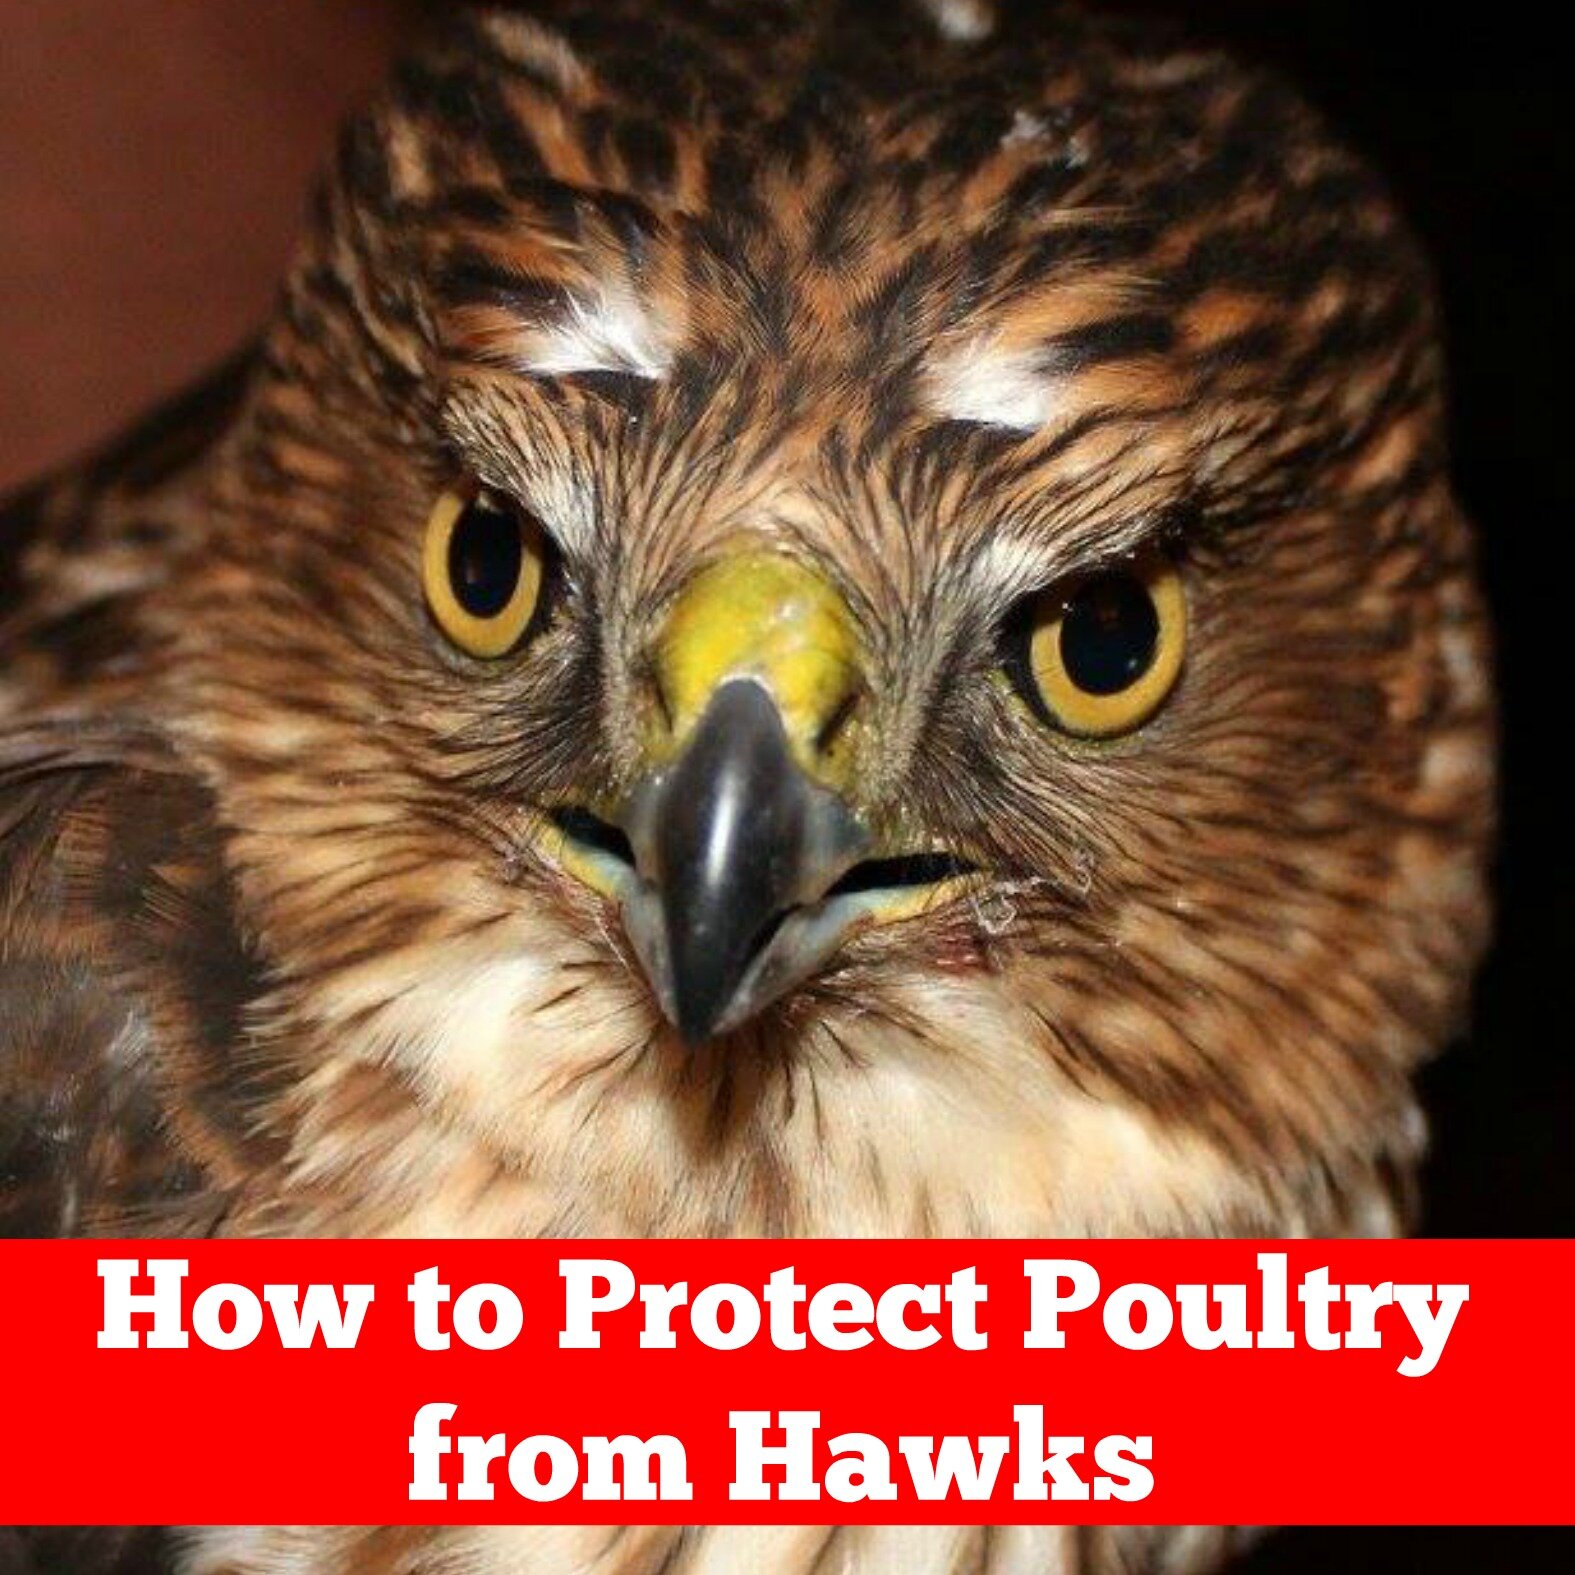 How to Protect Poultry from Hawks